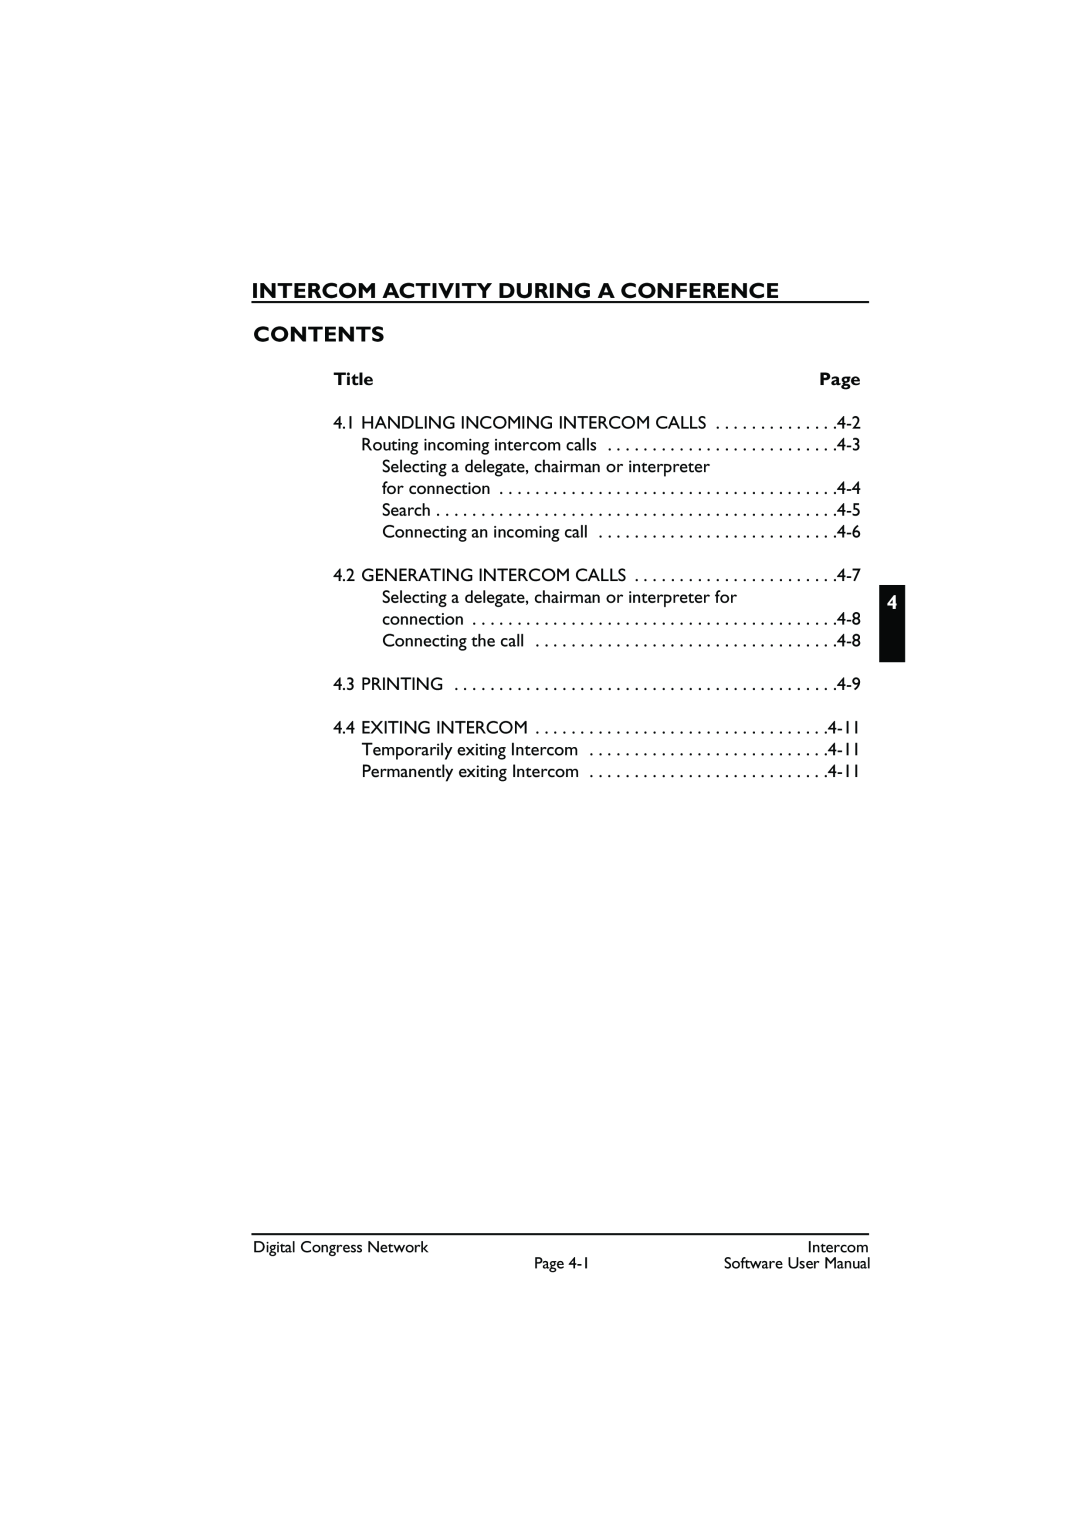 Bosch Appliances LBB 3573 user manual Intercom Activity During A Conference Contents, Title 